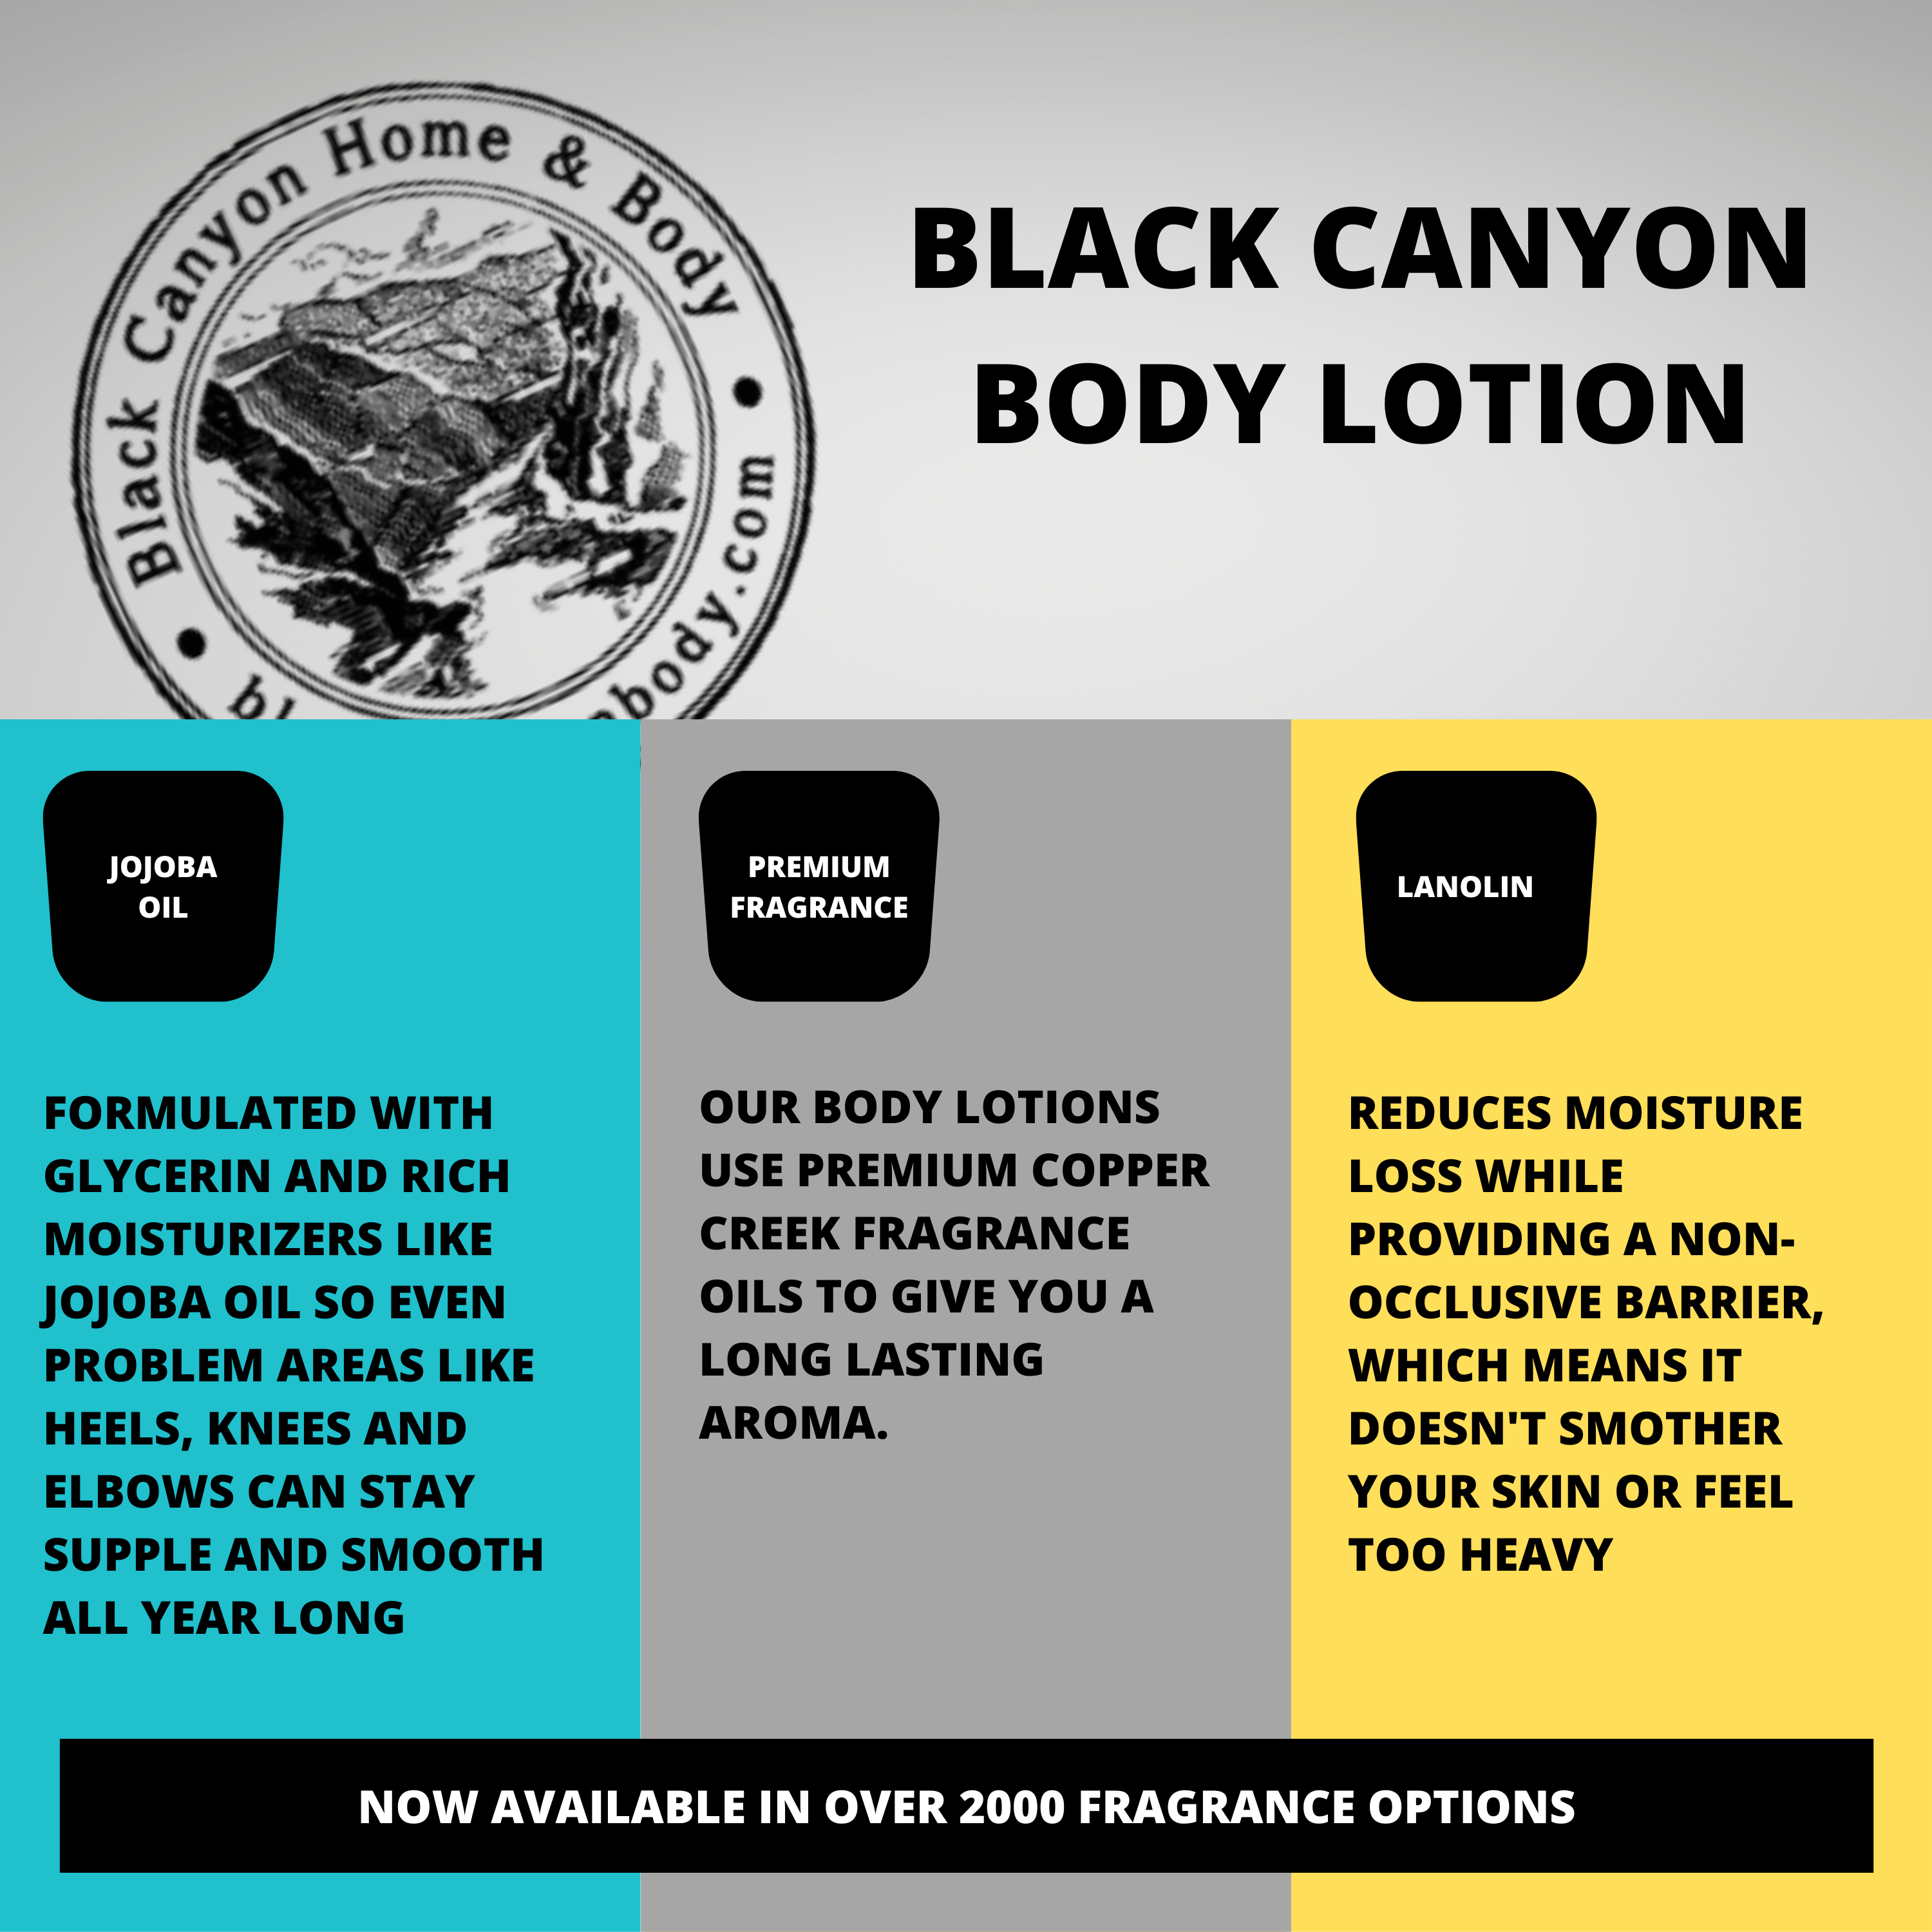 Black Canyon German Chocolate Cake Scented Luxury Body Lotion with Lanolin and Jojoba Oil